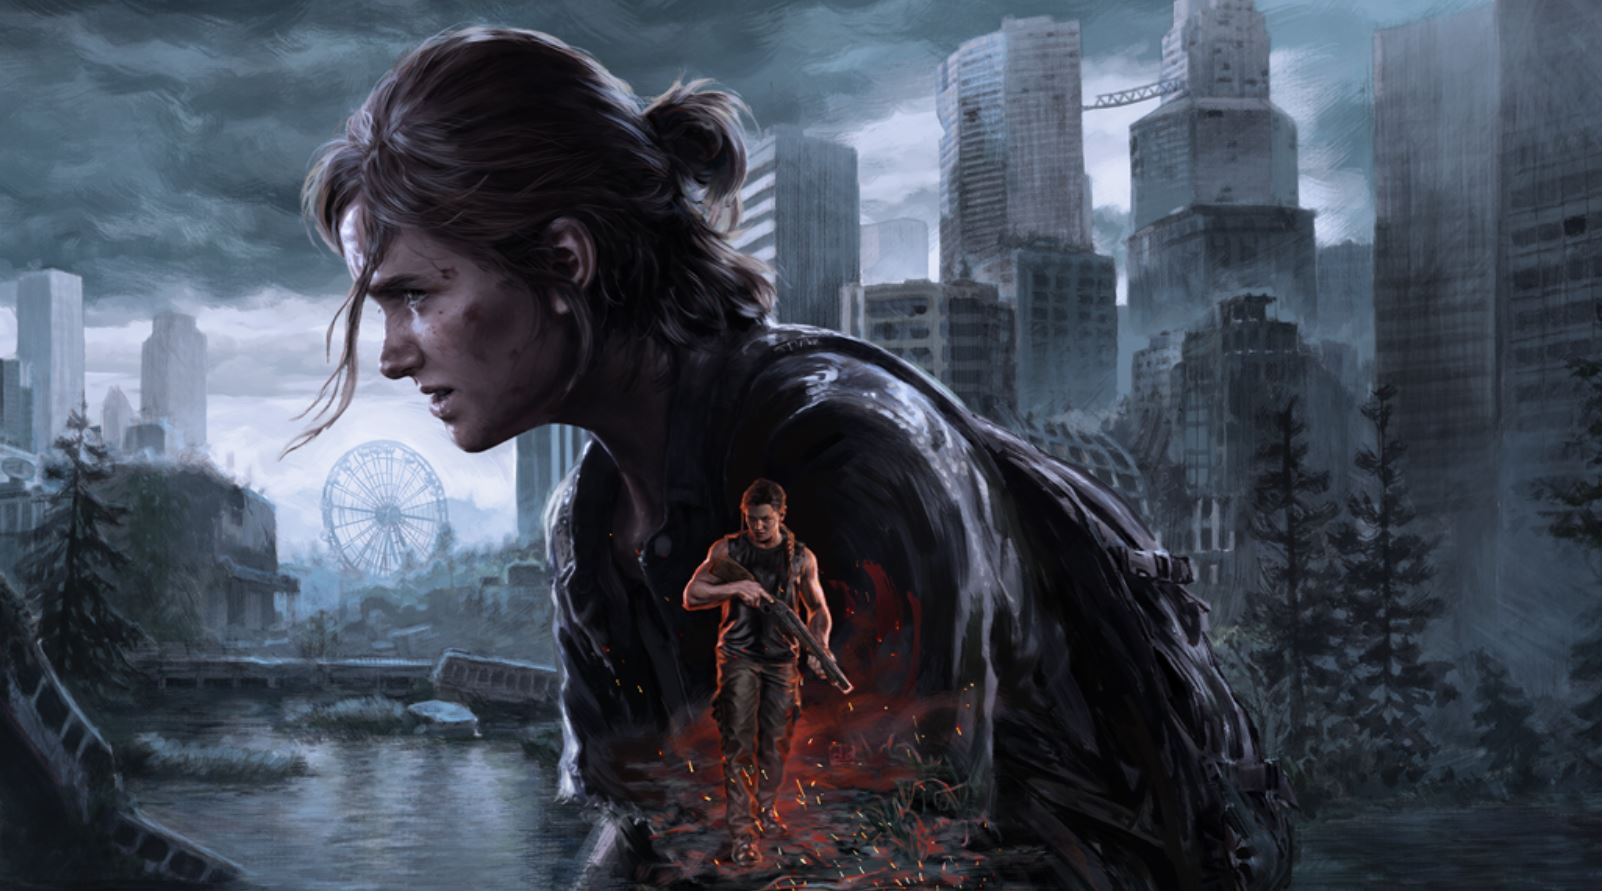 Key art for The Last of Us Part II Remastered